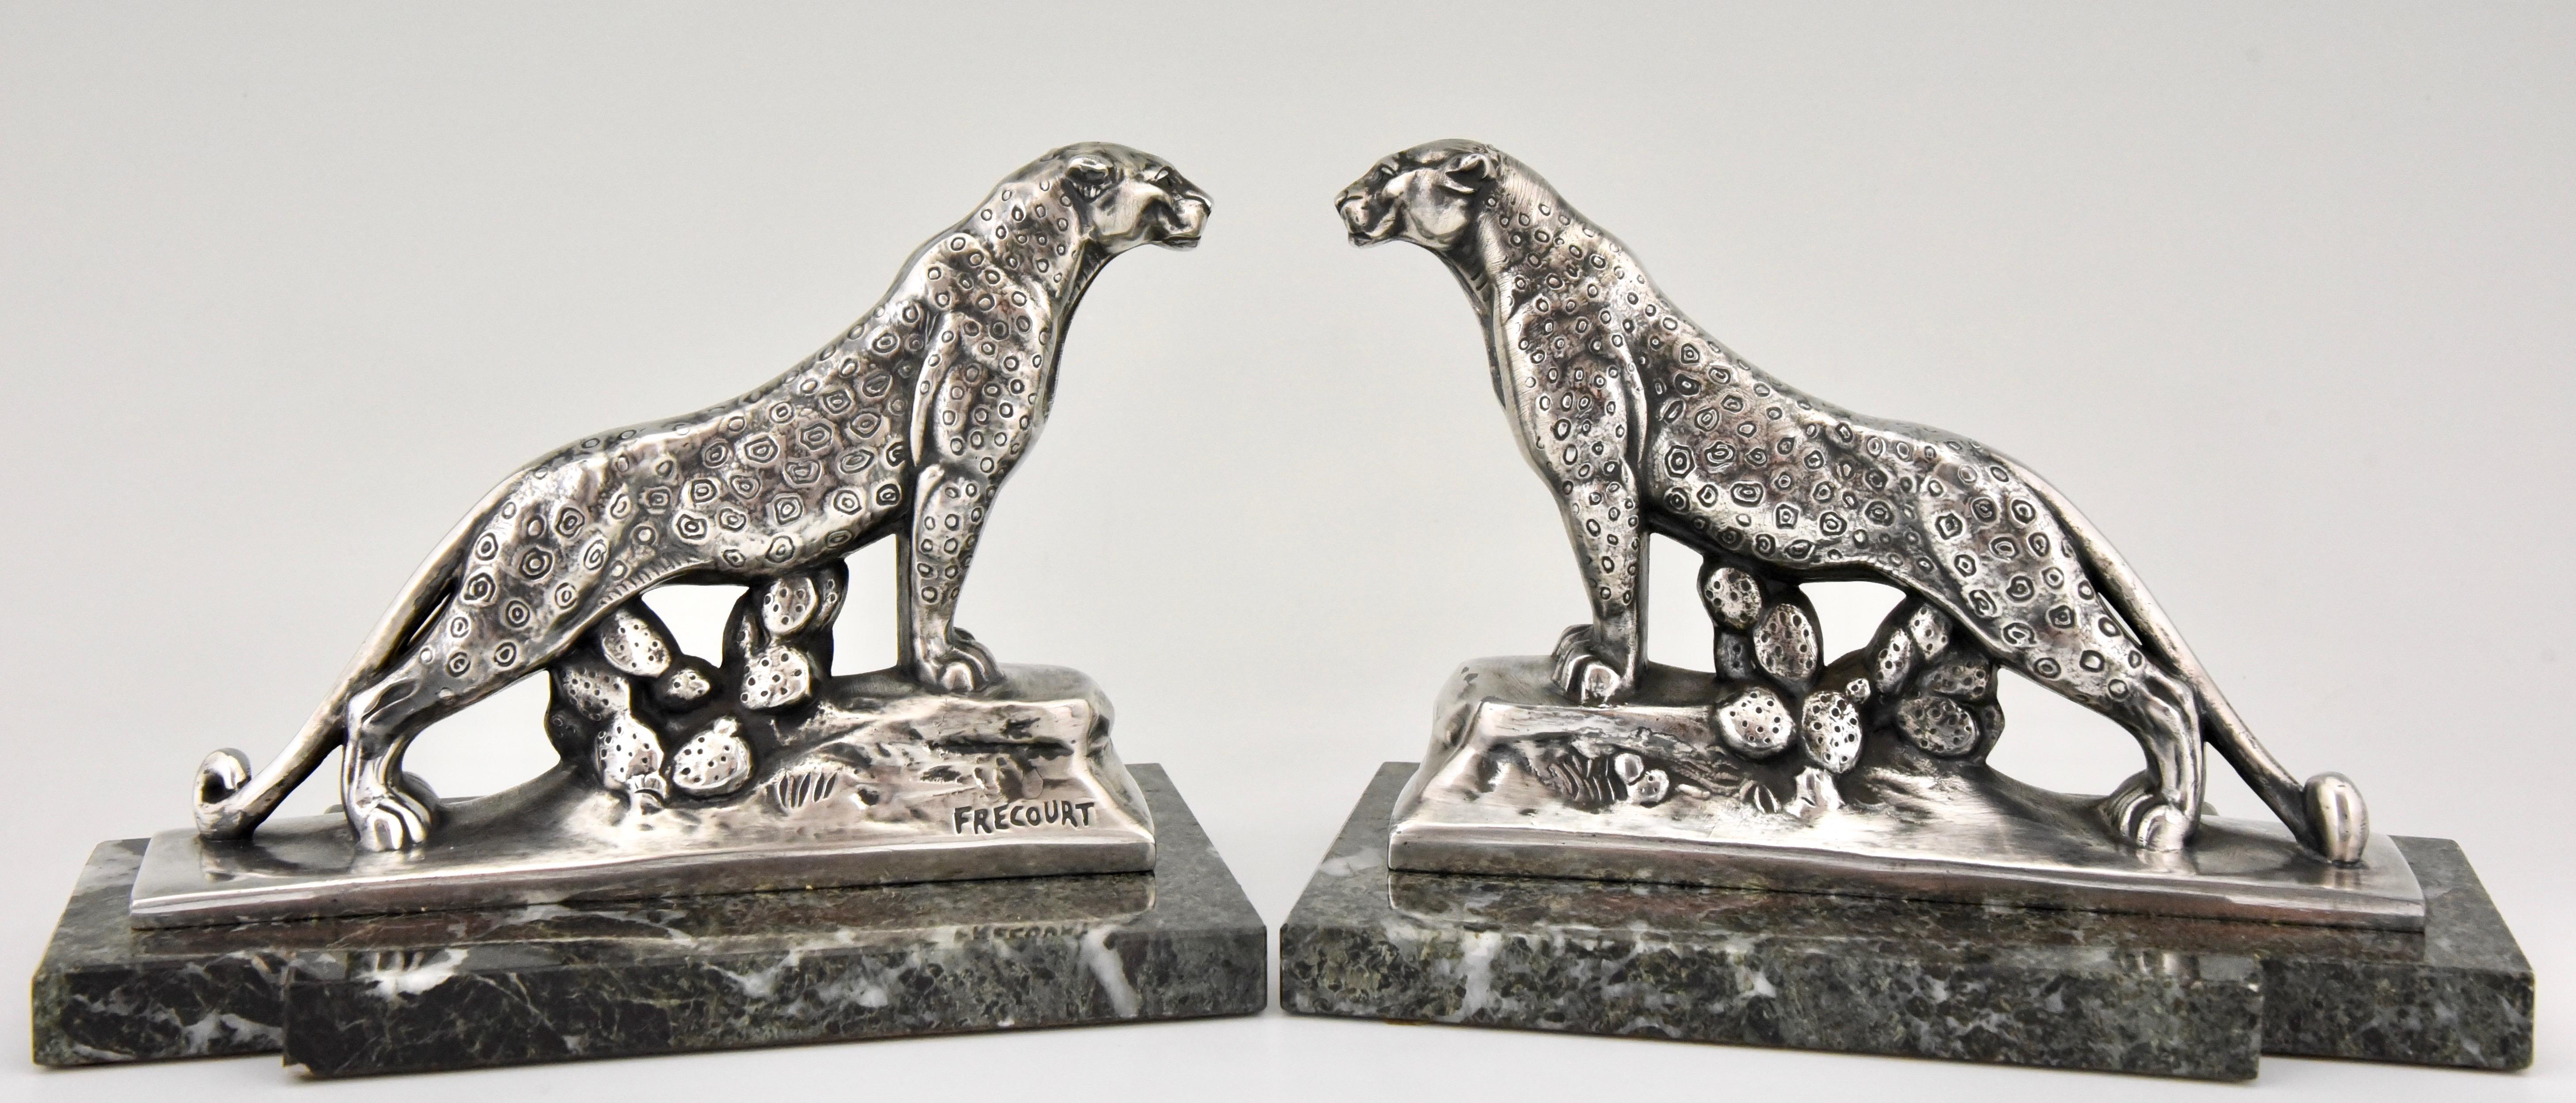 Art Deco panther bookends signed Frecourt 